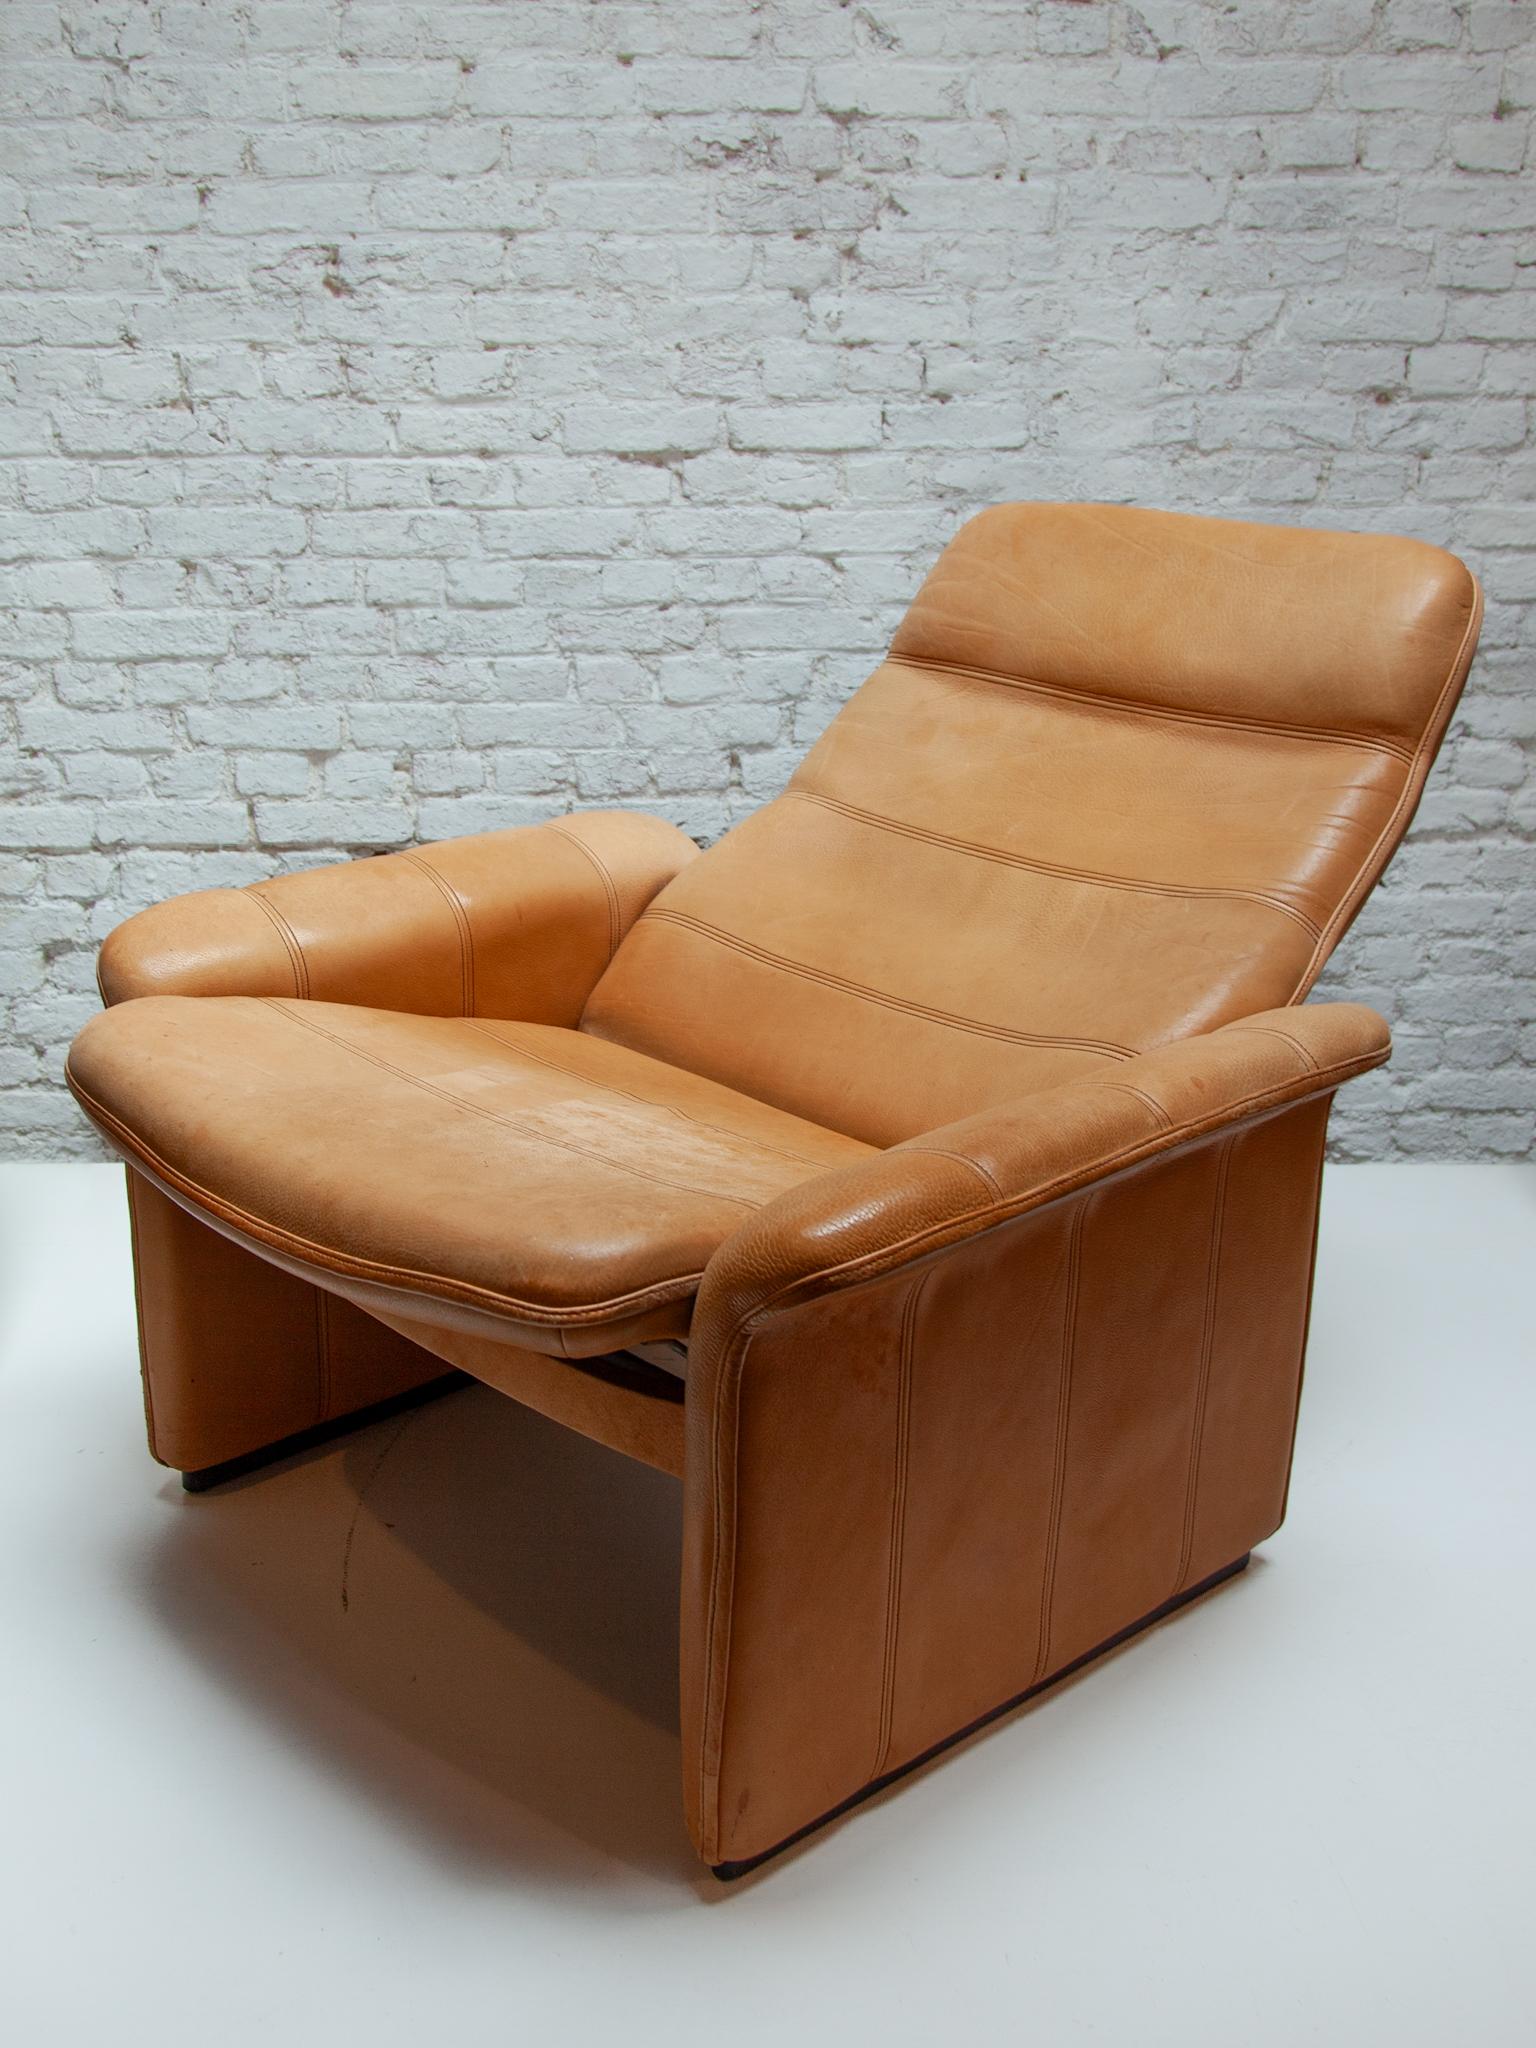 DS-50 Camel Buffalo Neck Leather Lounge Chair & Footstool by De Sede, 1970s For Sale 7